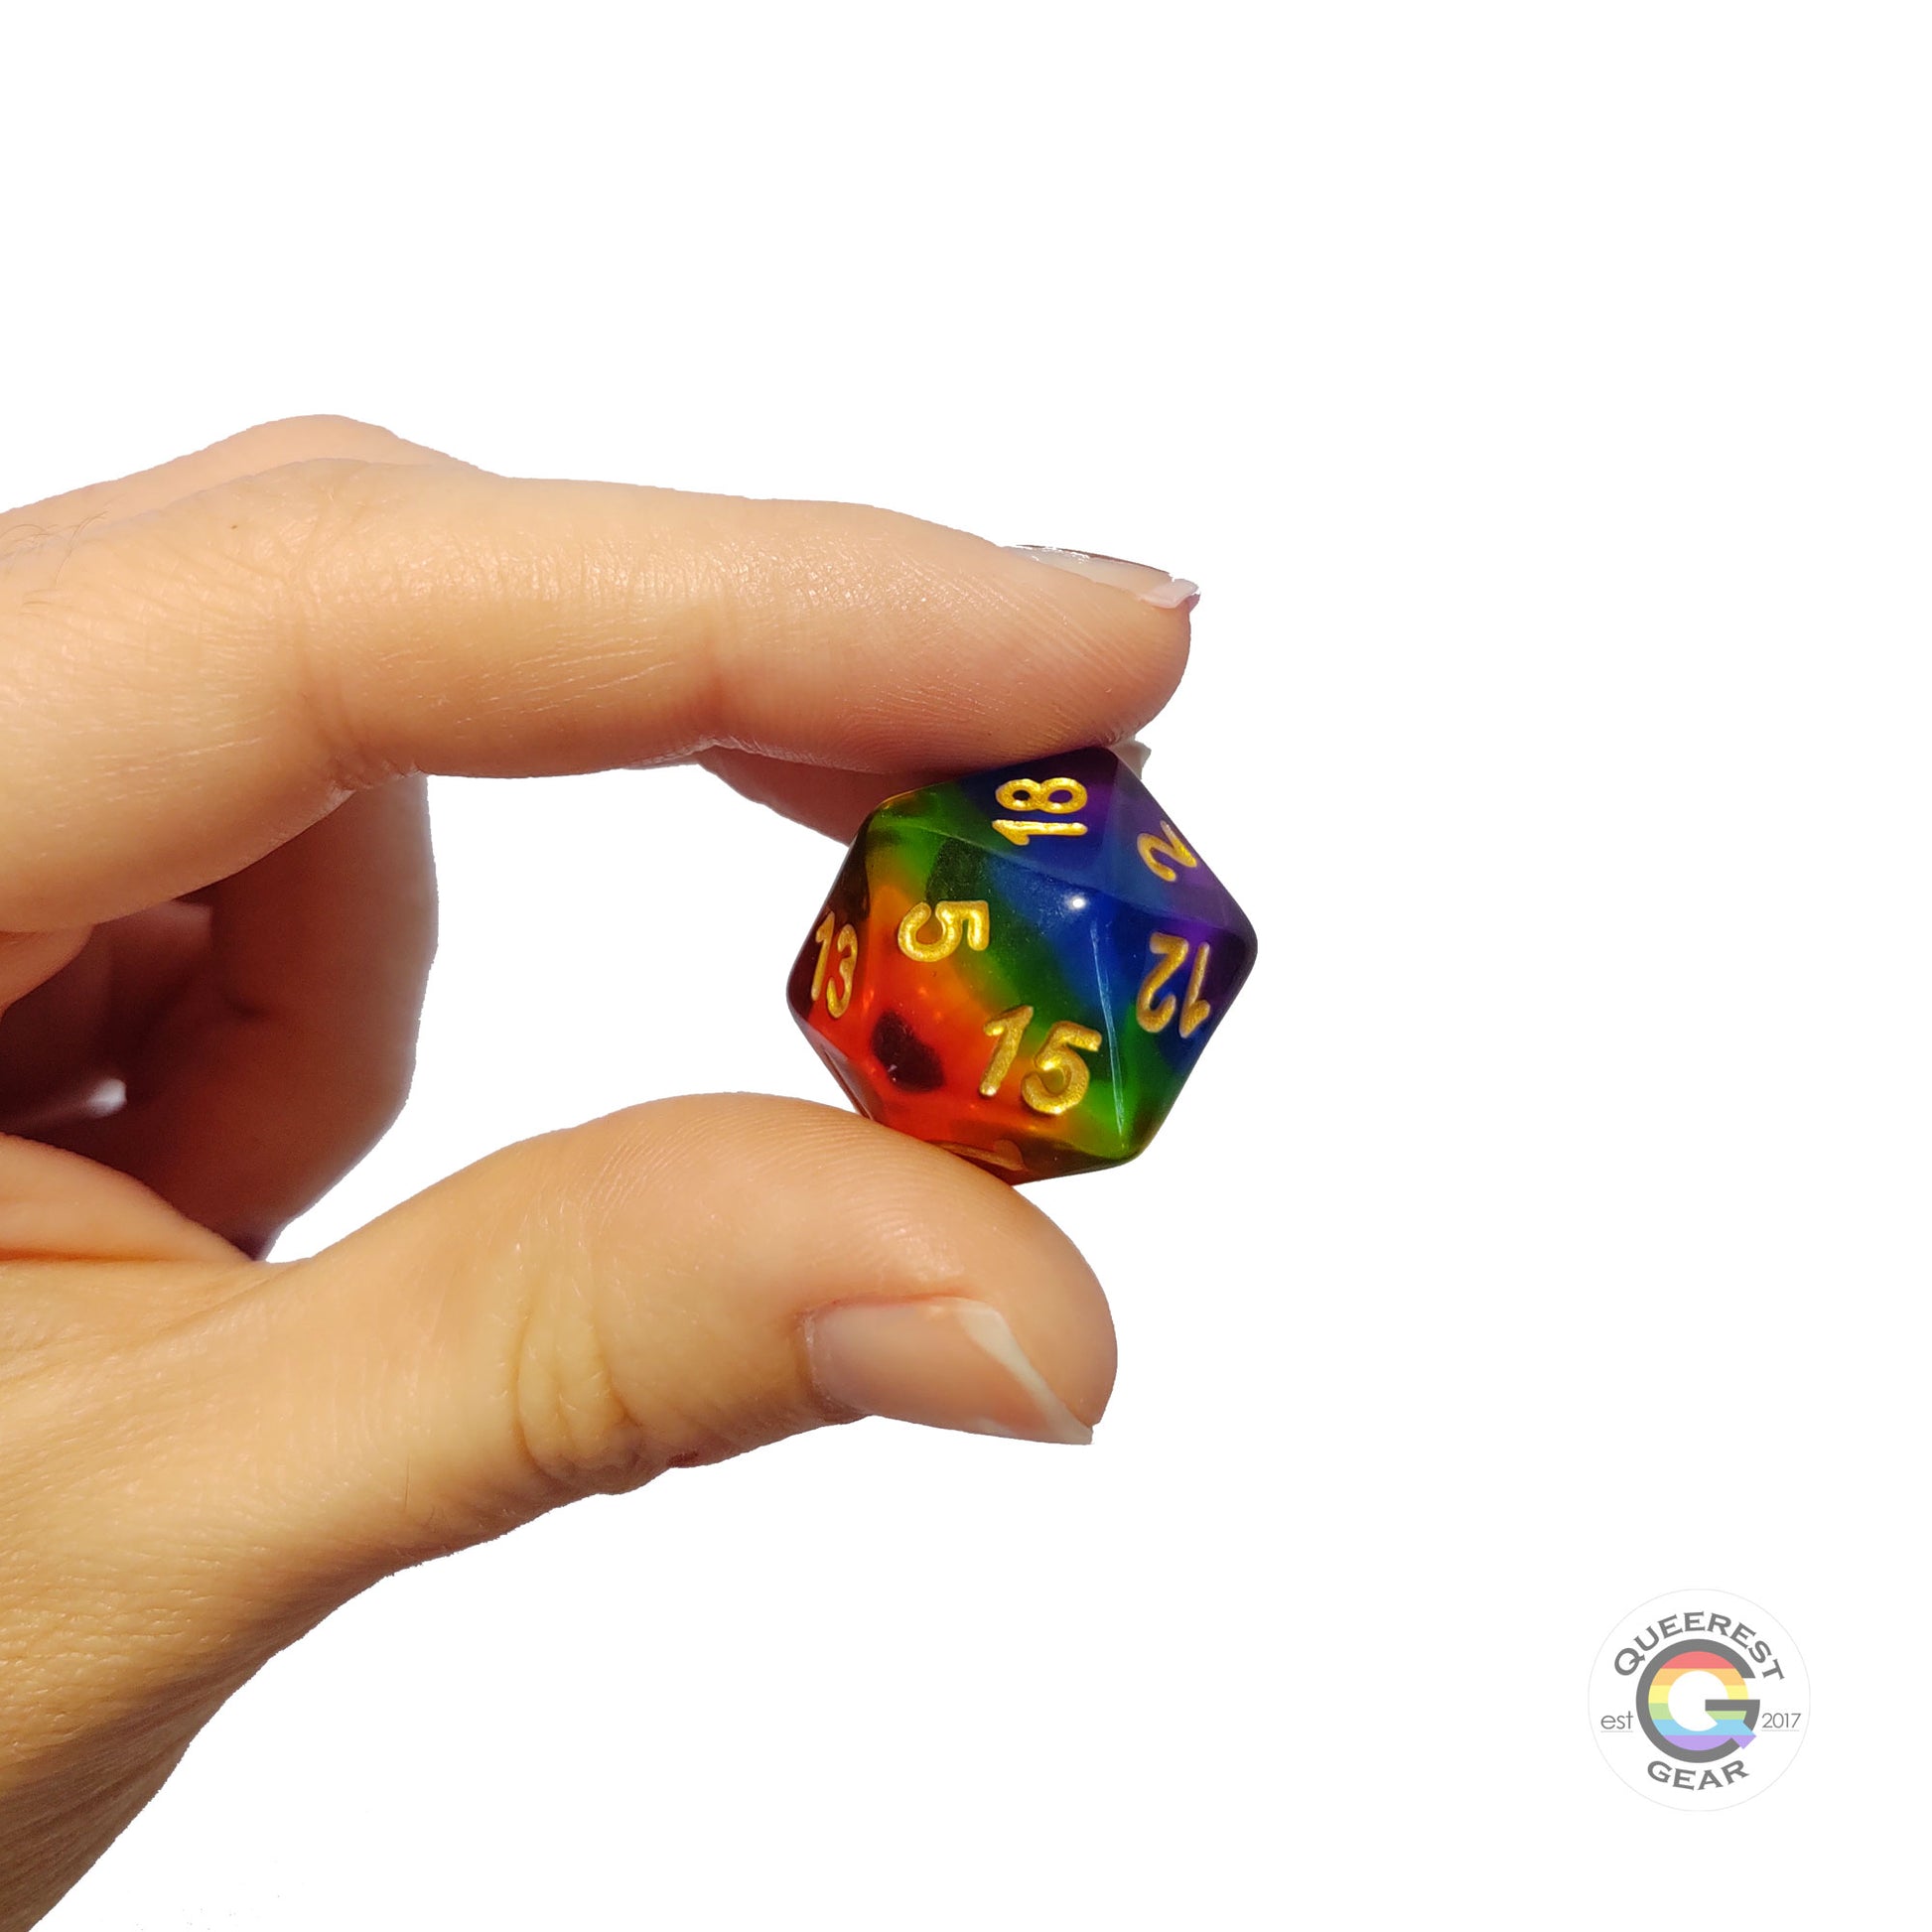  A hand holding up the rainbow d20 to show off the color and transparency